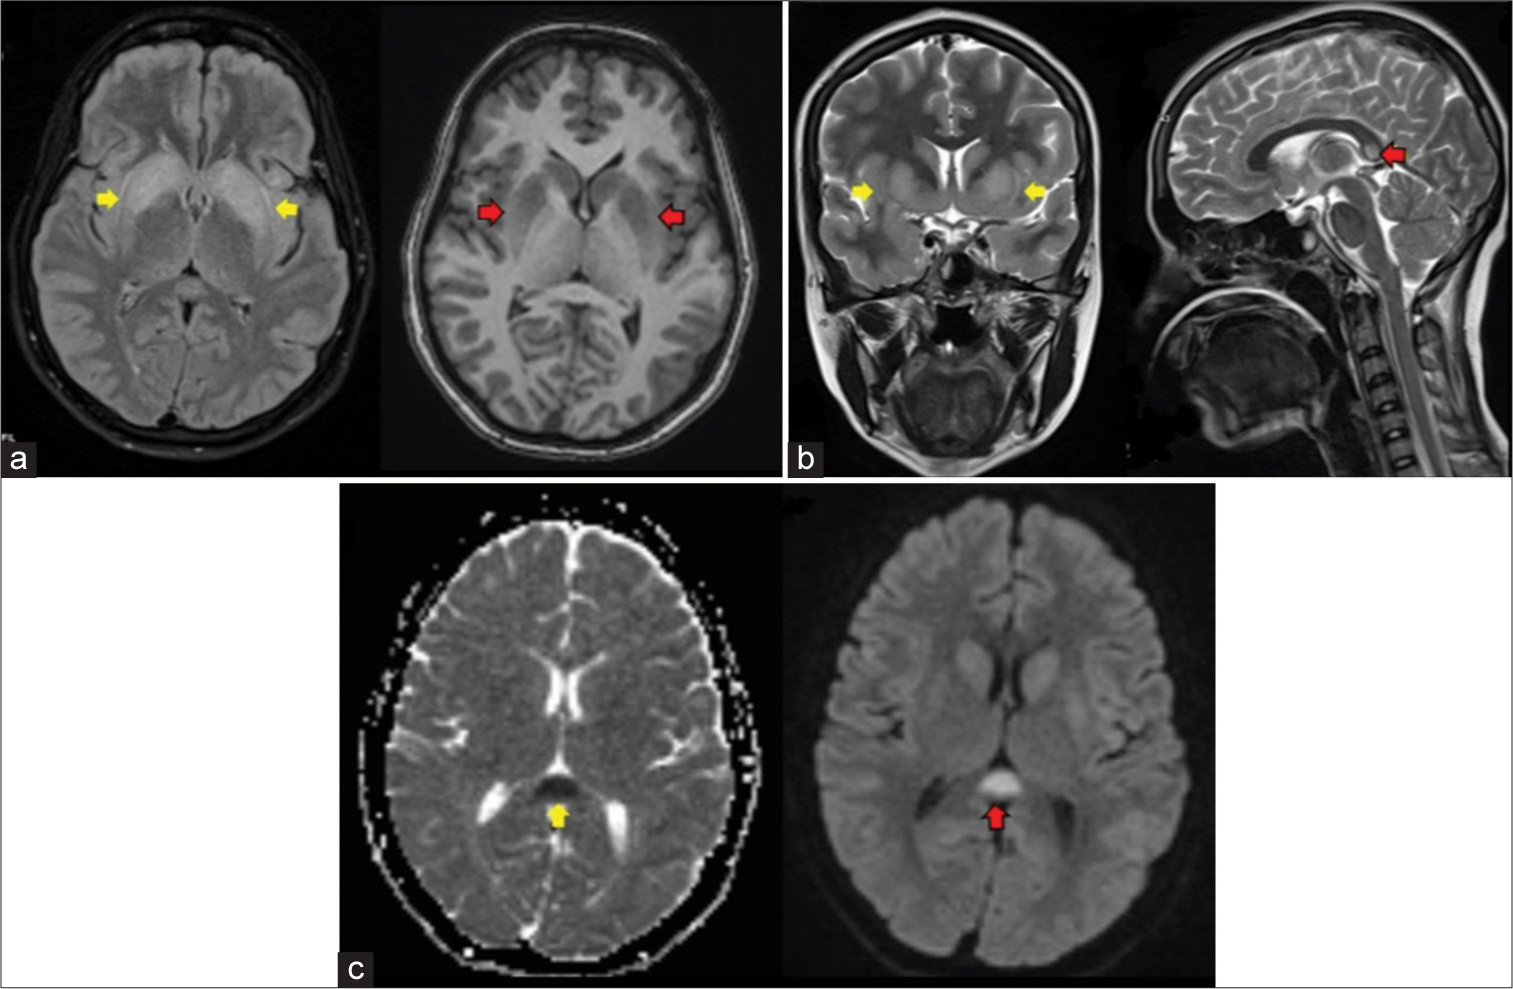 A 24-year-old woman with autoimmune encephalitis who presented with altered sensorium (a) FLAIR-axial shows hyperintensity in bilateral basal ganglia (yellow arrows), T1-axial shows hypointensity in bilateral basal ganglia (red arrows) (b) T2-coronal shows hyperintensity in bilateral basal ganglia (yellow arrows), T2-sagittal shows hyperintensity in splenium of corpus callosum (red arrow), (c) Apparent diffusion coefficient (ADC)-axial shows hypointensity in splenium of corpus callosum (yellow arrow), Diffusion weighted imaging (DWI)-axial shows hyperintensity in splenium of corpus callosum (red arrow).